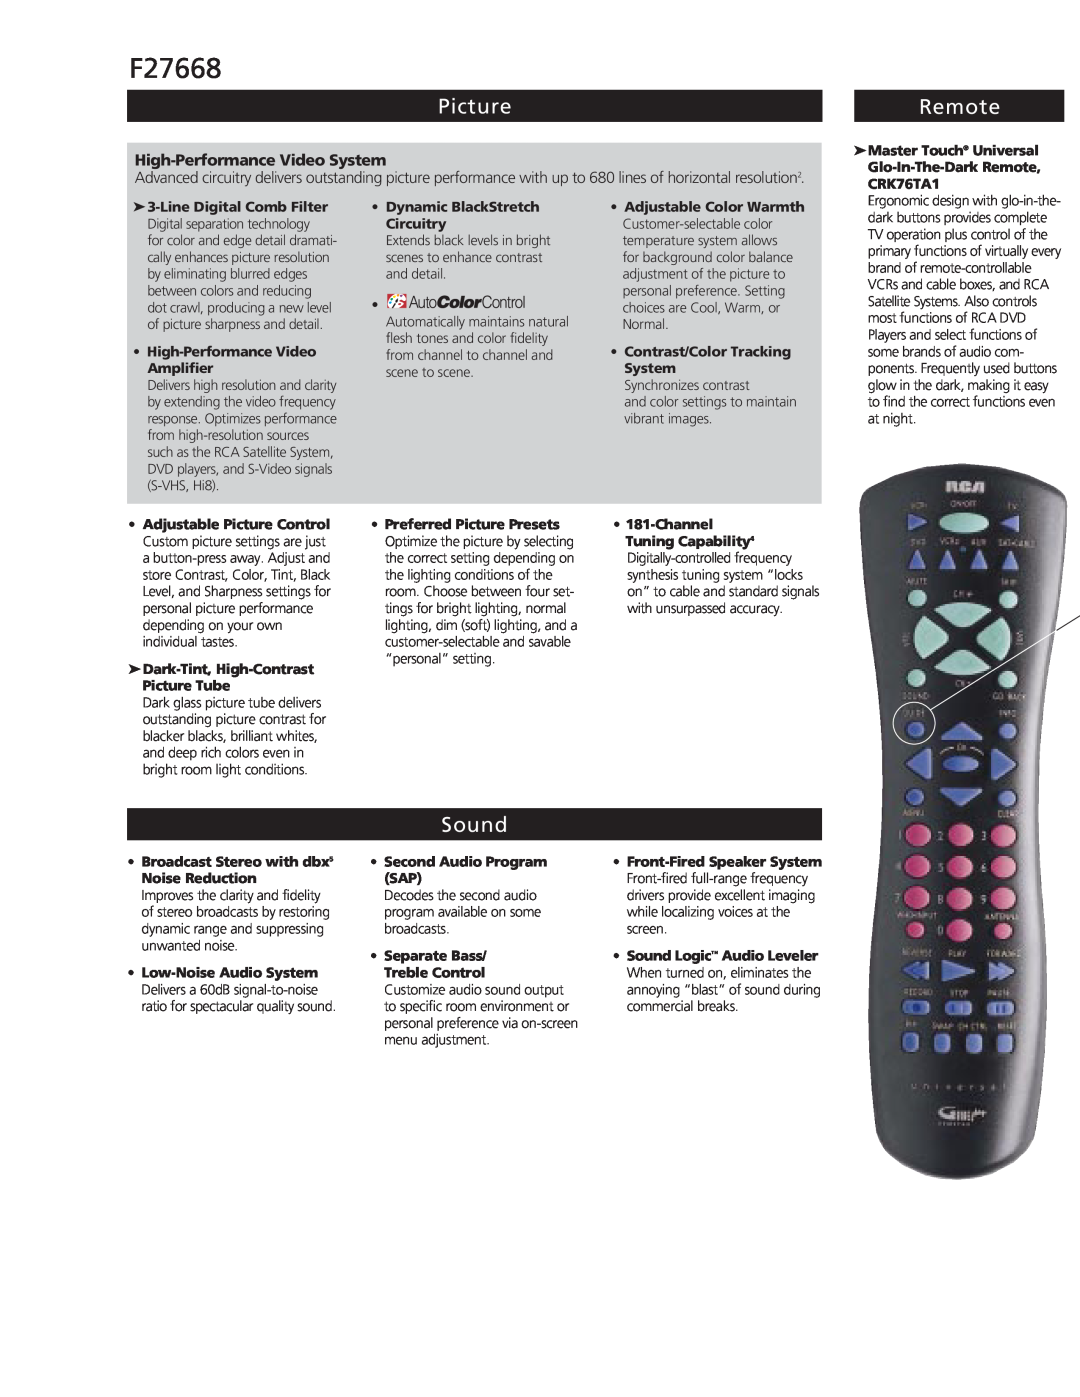 RCA F27668 manual Picture, Remote, Sound, High-Performance Video System 